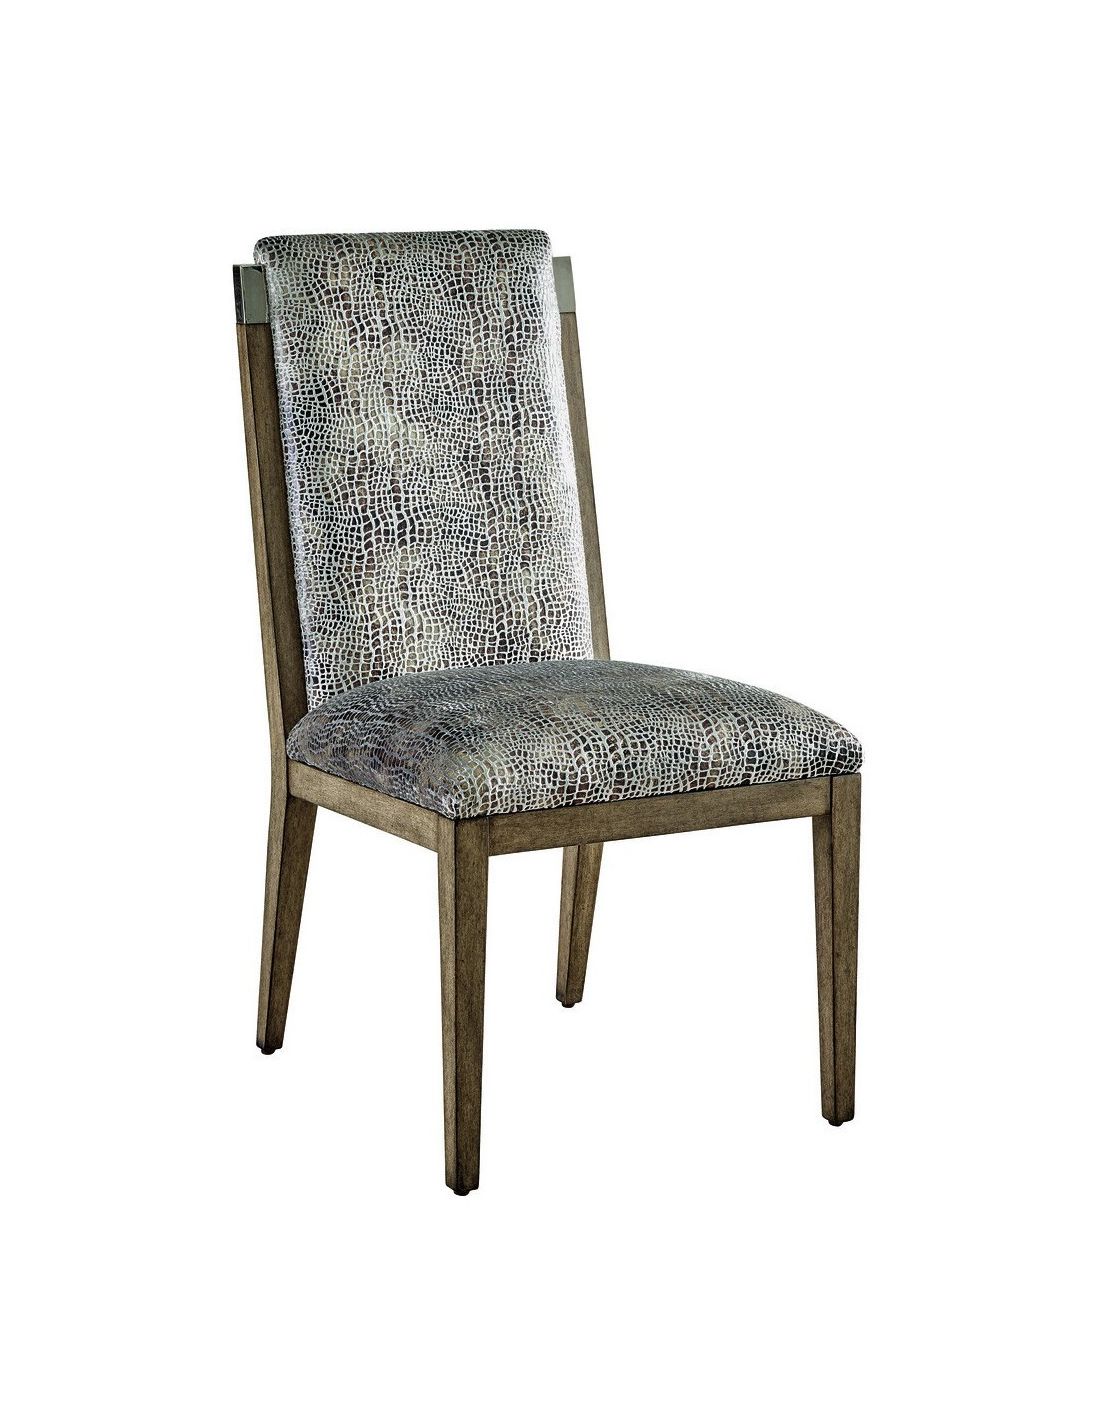 lavish rustic dining chair from our modern dakota collection dha47